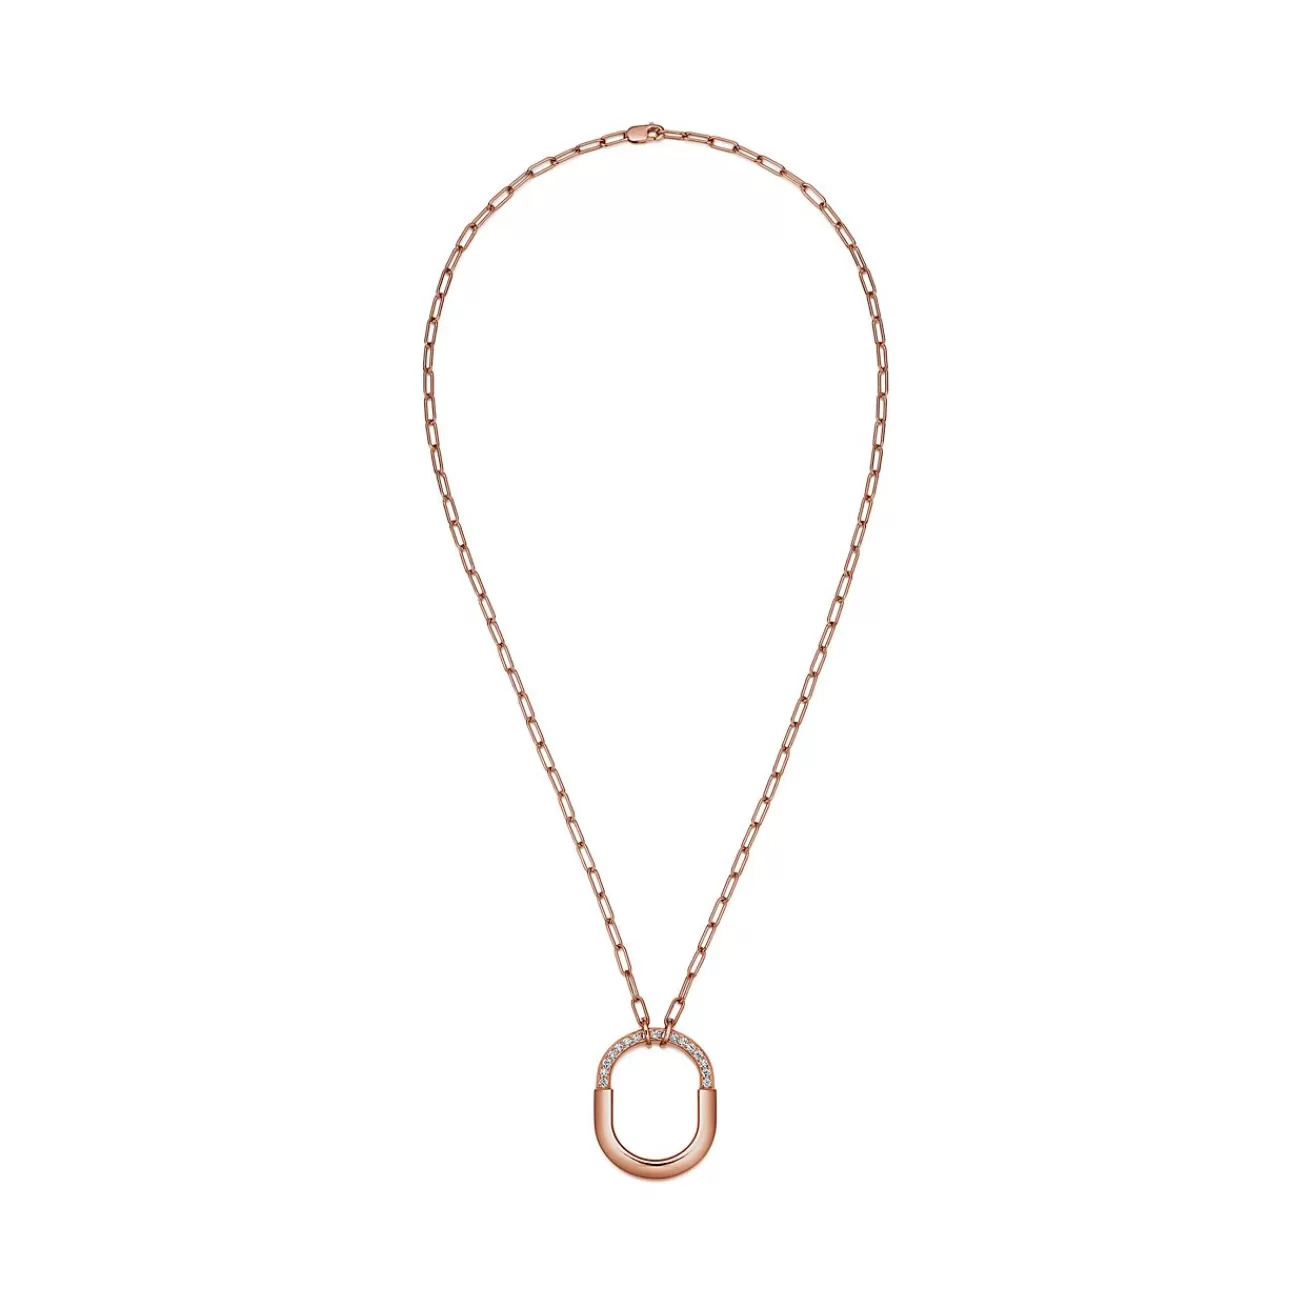 Tiffany & Co. Tiffany Lock Pendant in Rose Gold with Diamonds, Medium | ^ Necklaces & Pendants | Rose Gold Jewelry